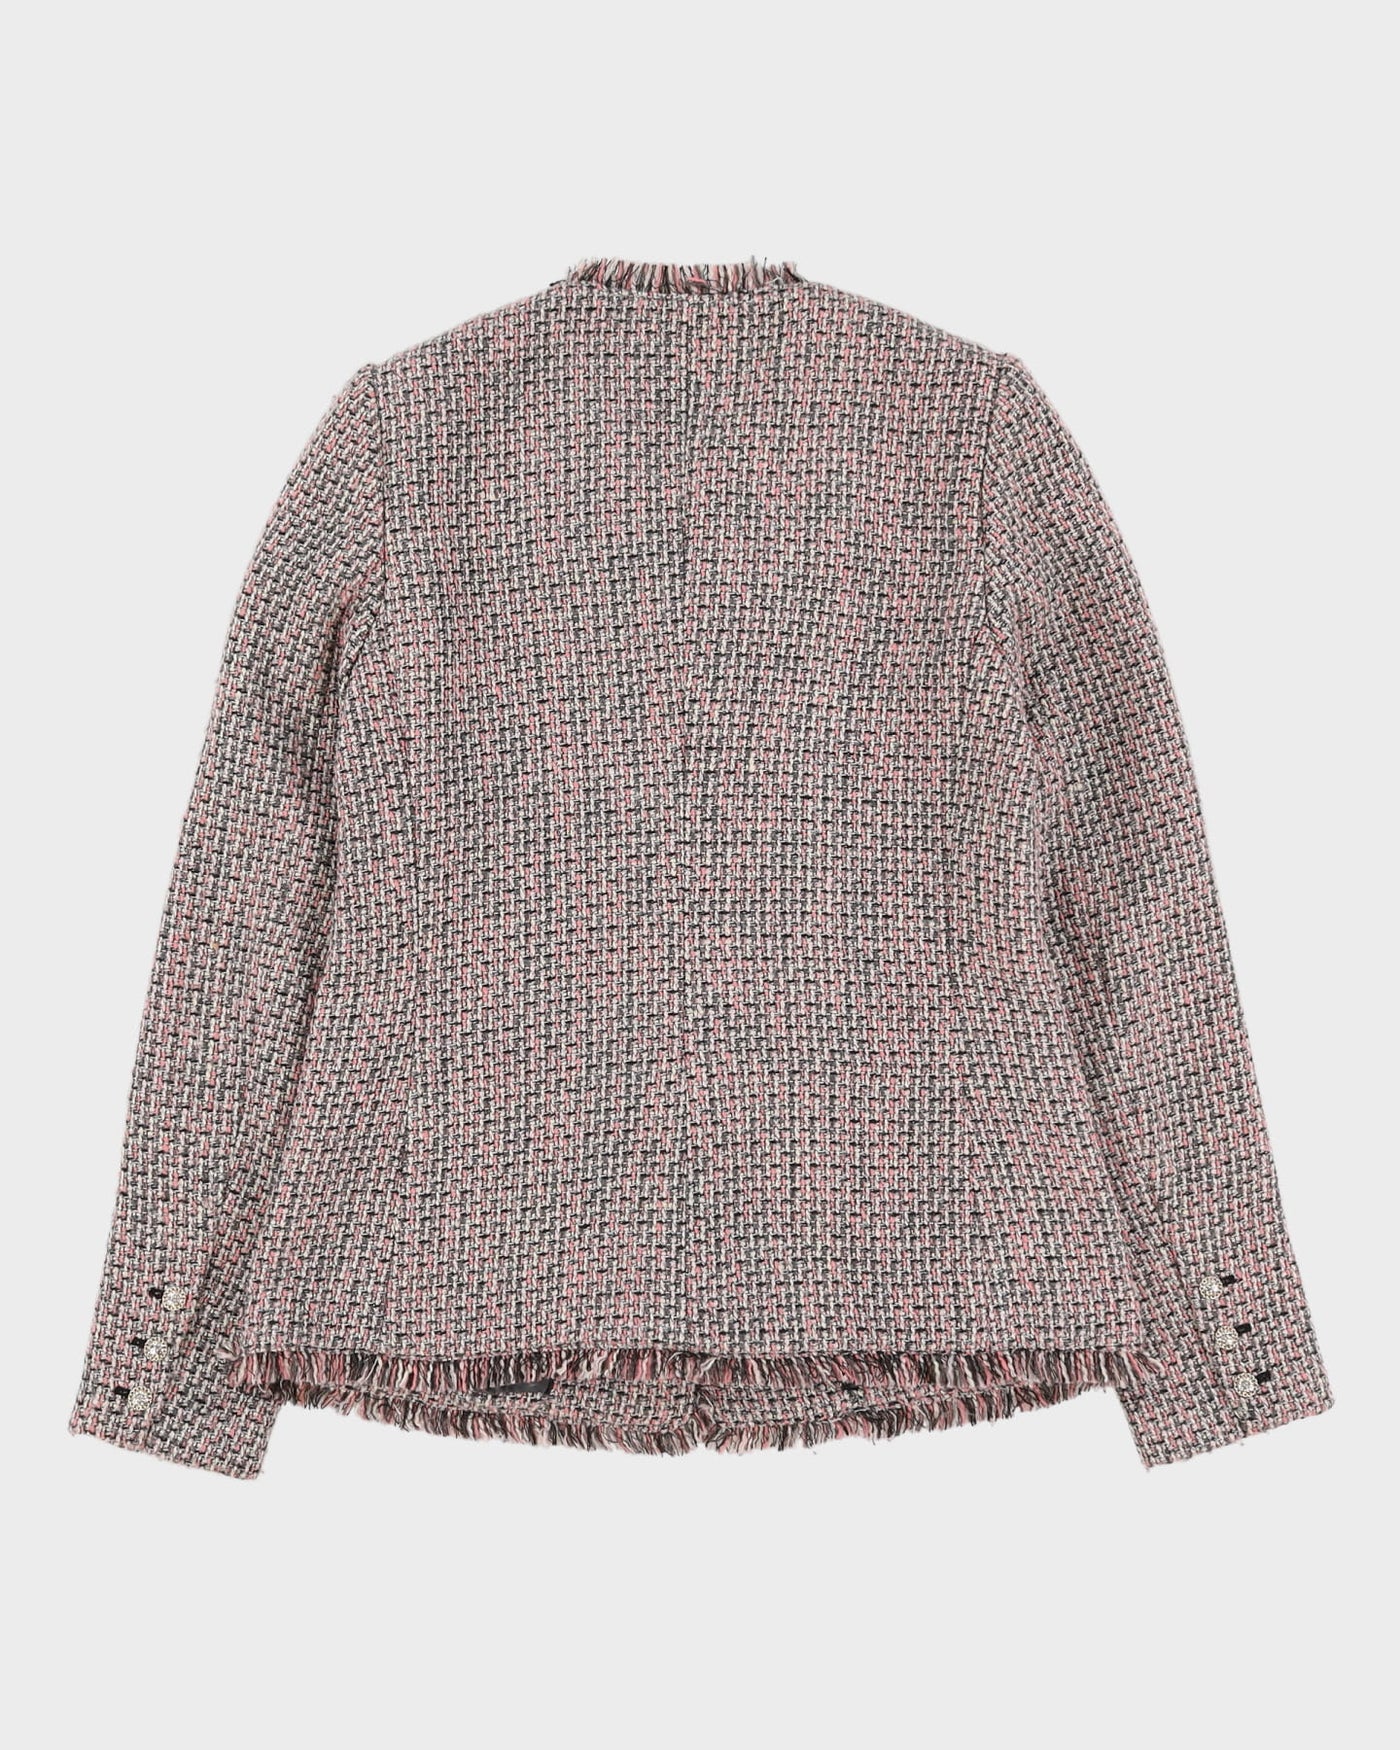 Karl Lagerfeld Pink And Black Woven Blazer - S